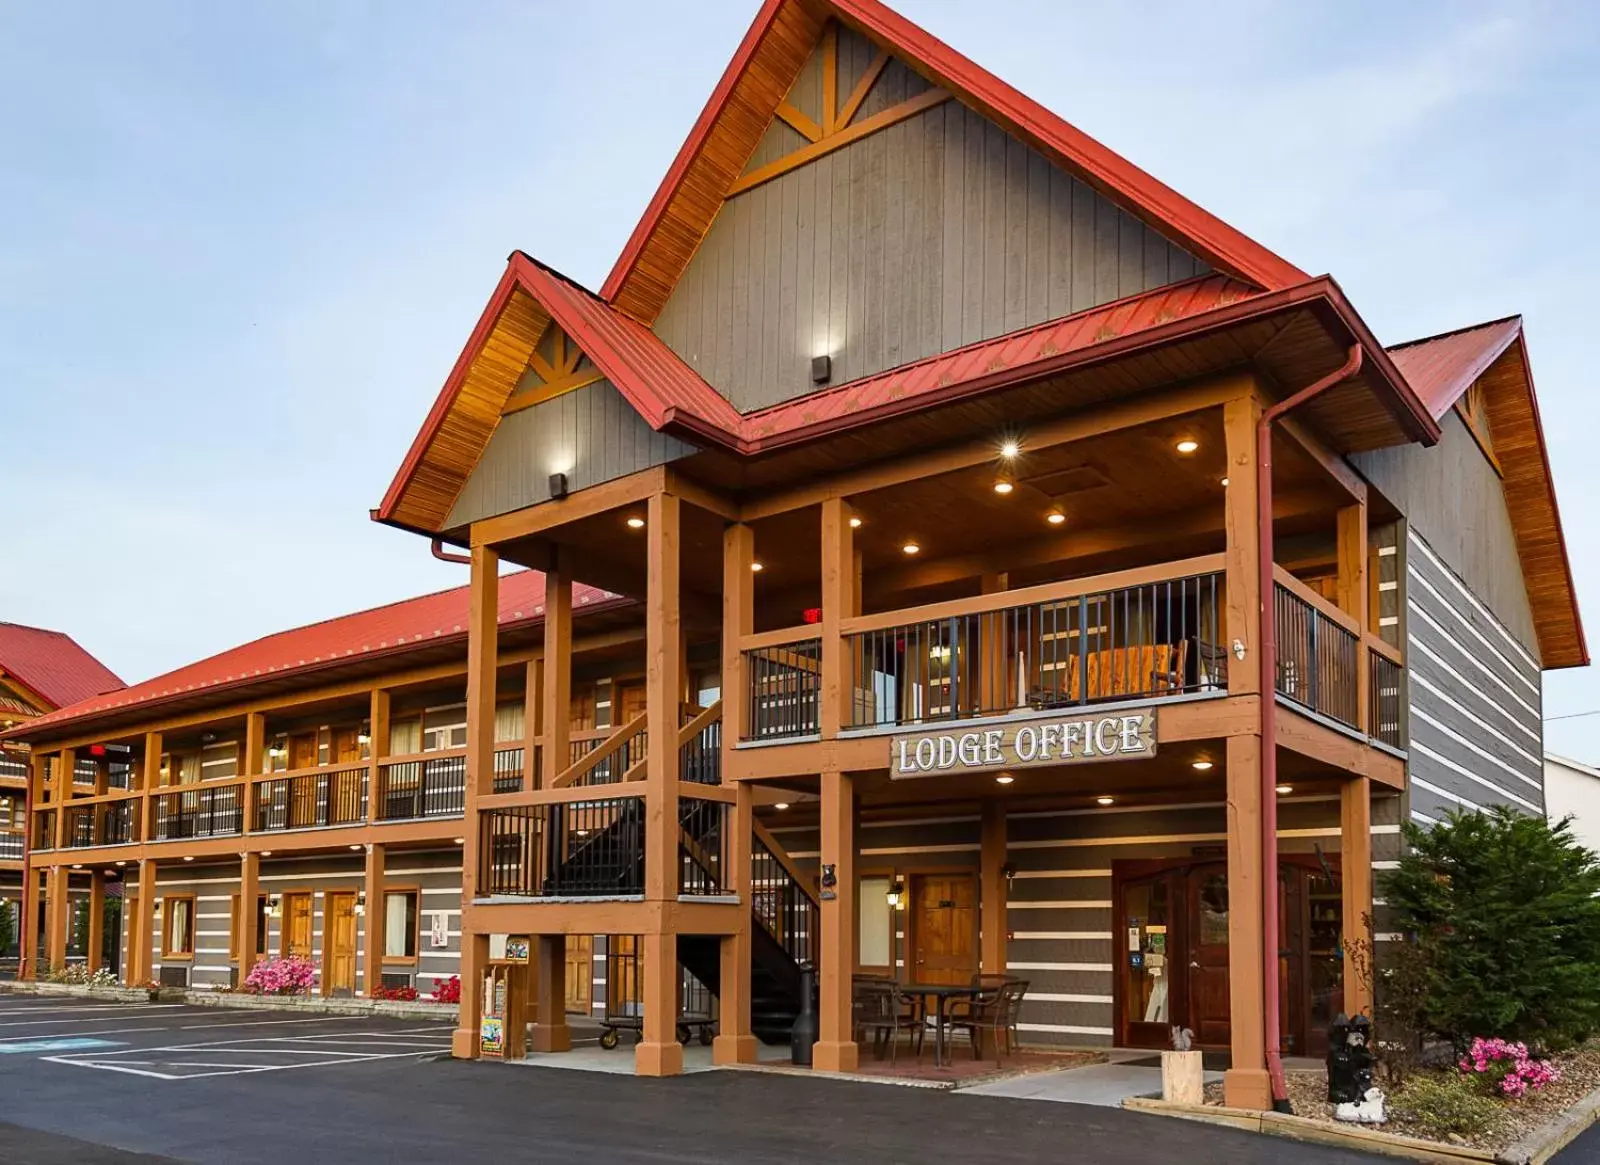 Property building, Facade/Entrance in Timbers Lodge